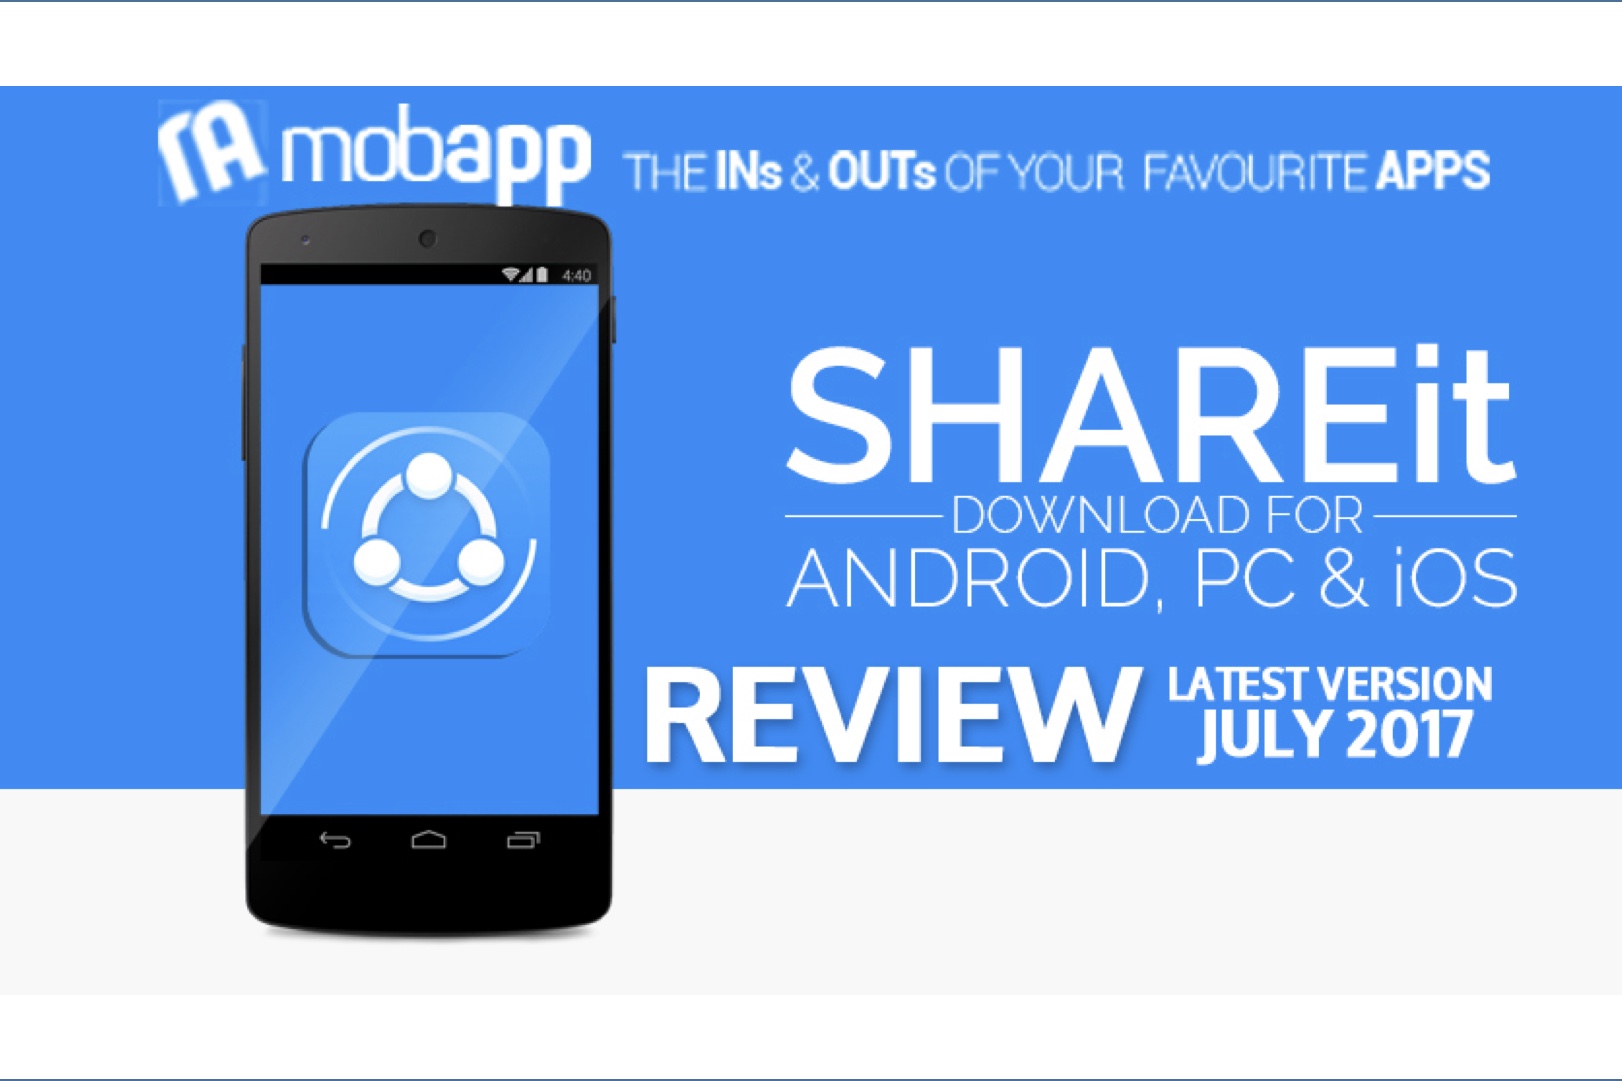 mobapp,apps,reviews,SHAREit,shareit,share it,sharing files,music,pictures,videos,no mobile data,free,available,iOS,windows,PC,android,rating,digital media,data,downloads,users,content,blue icon,username,avatar,icon,send,receive,SHAREit users,radar,connect,sent,received,progress,size,time,recommended,